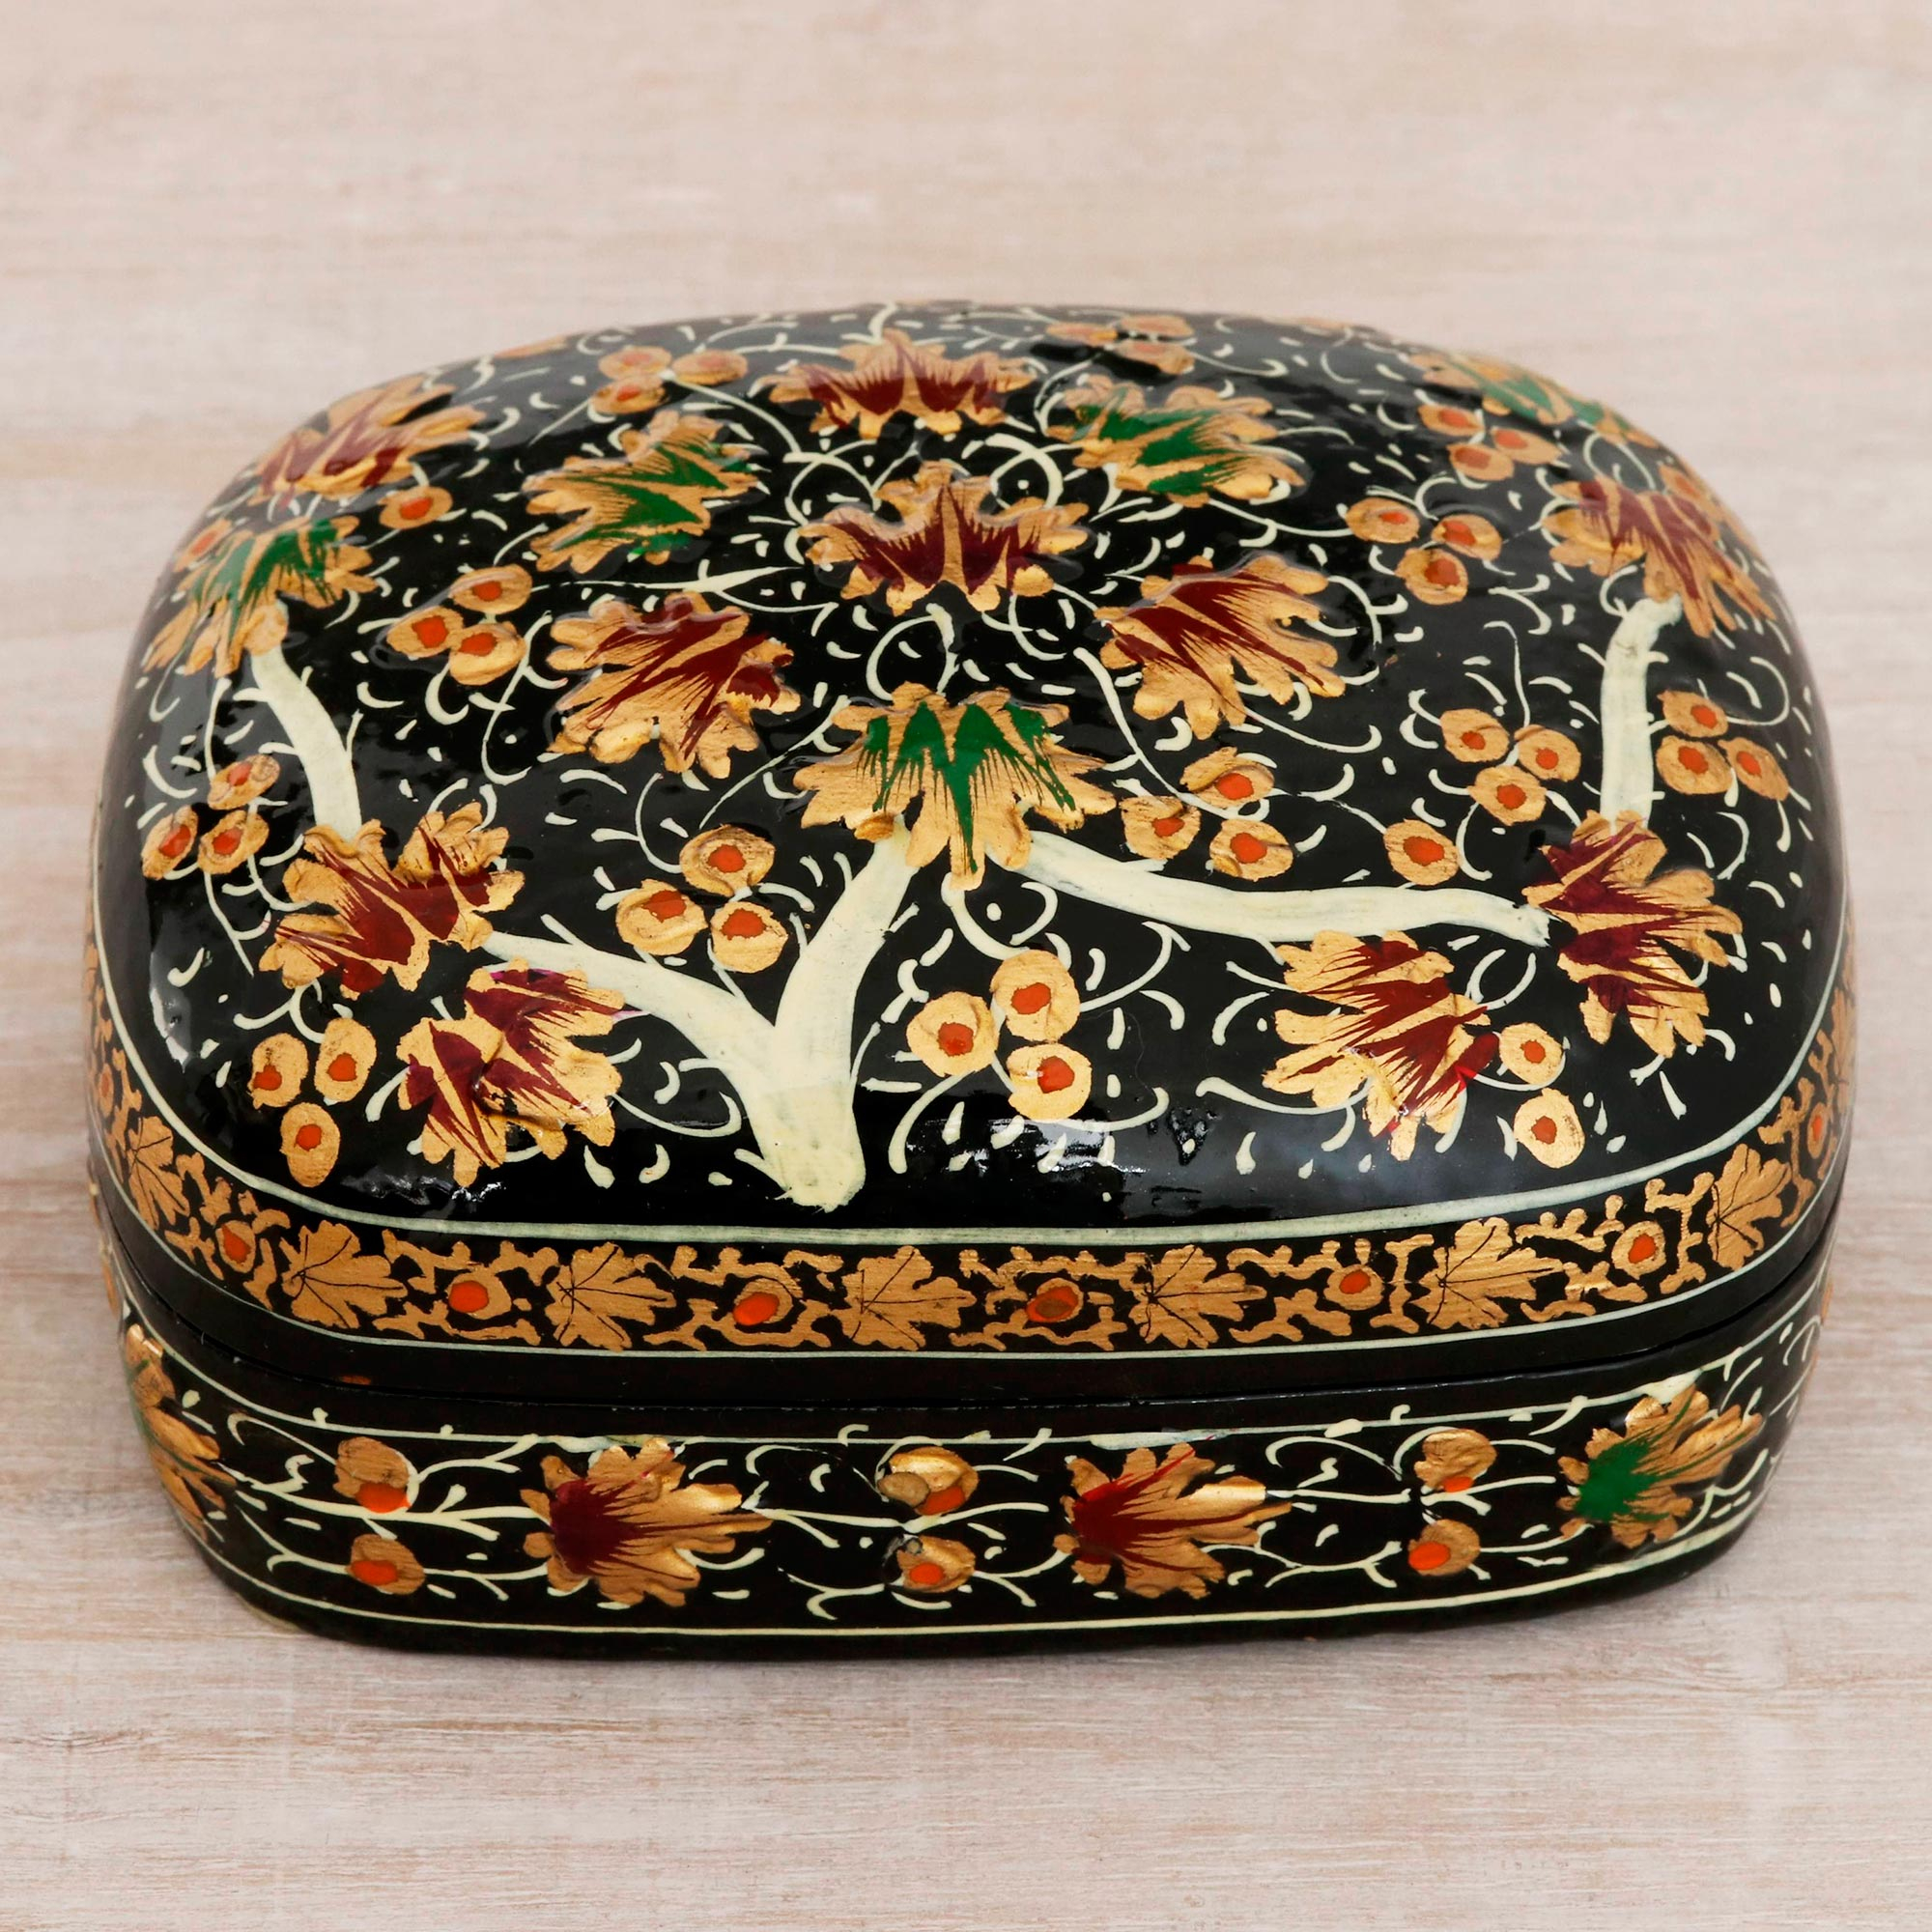 Wood and Papier Mache Decorative Box with Floral Theme